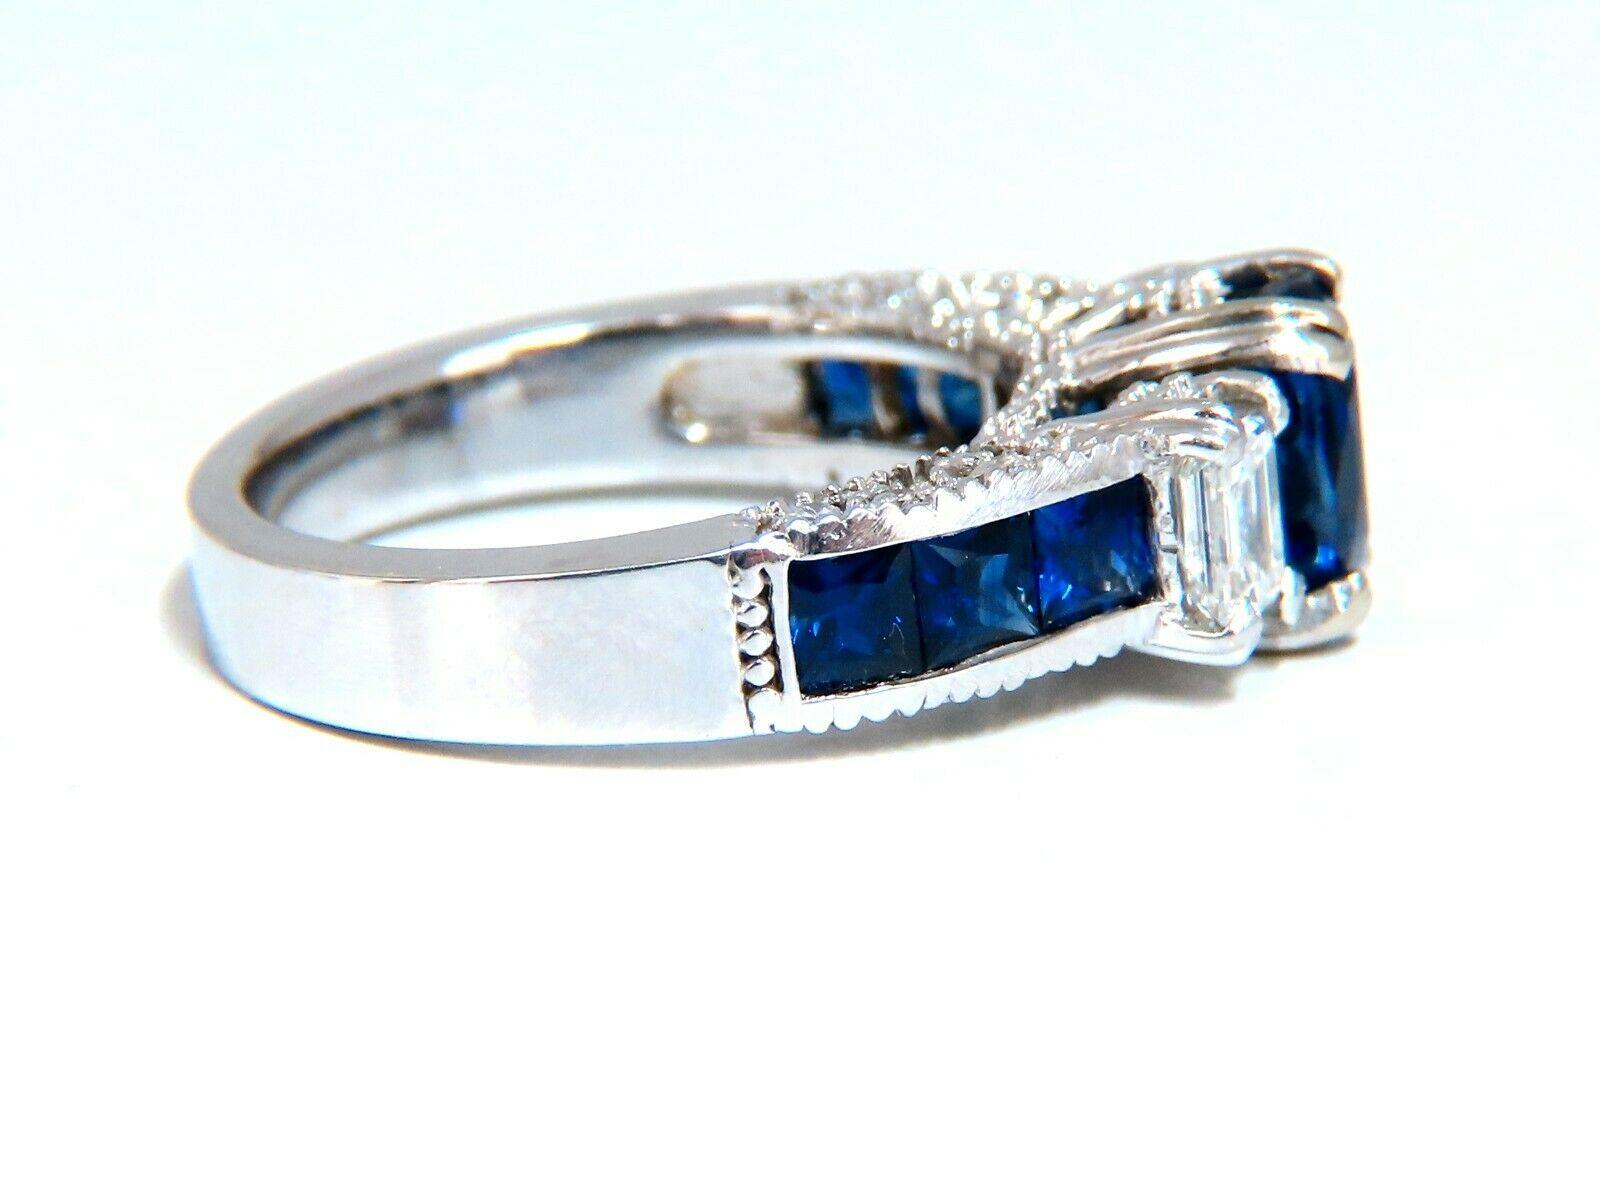 GIA Certified 1.86 Carat Natural Sapphire Diamonds Ring & Matching Eternity Band For Sale 5